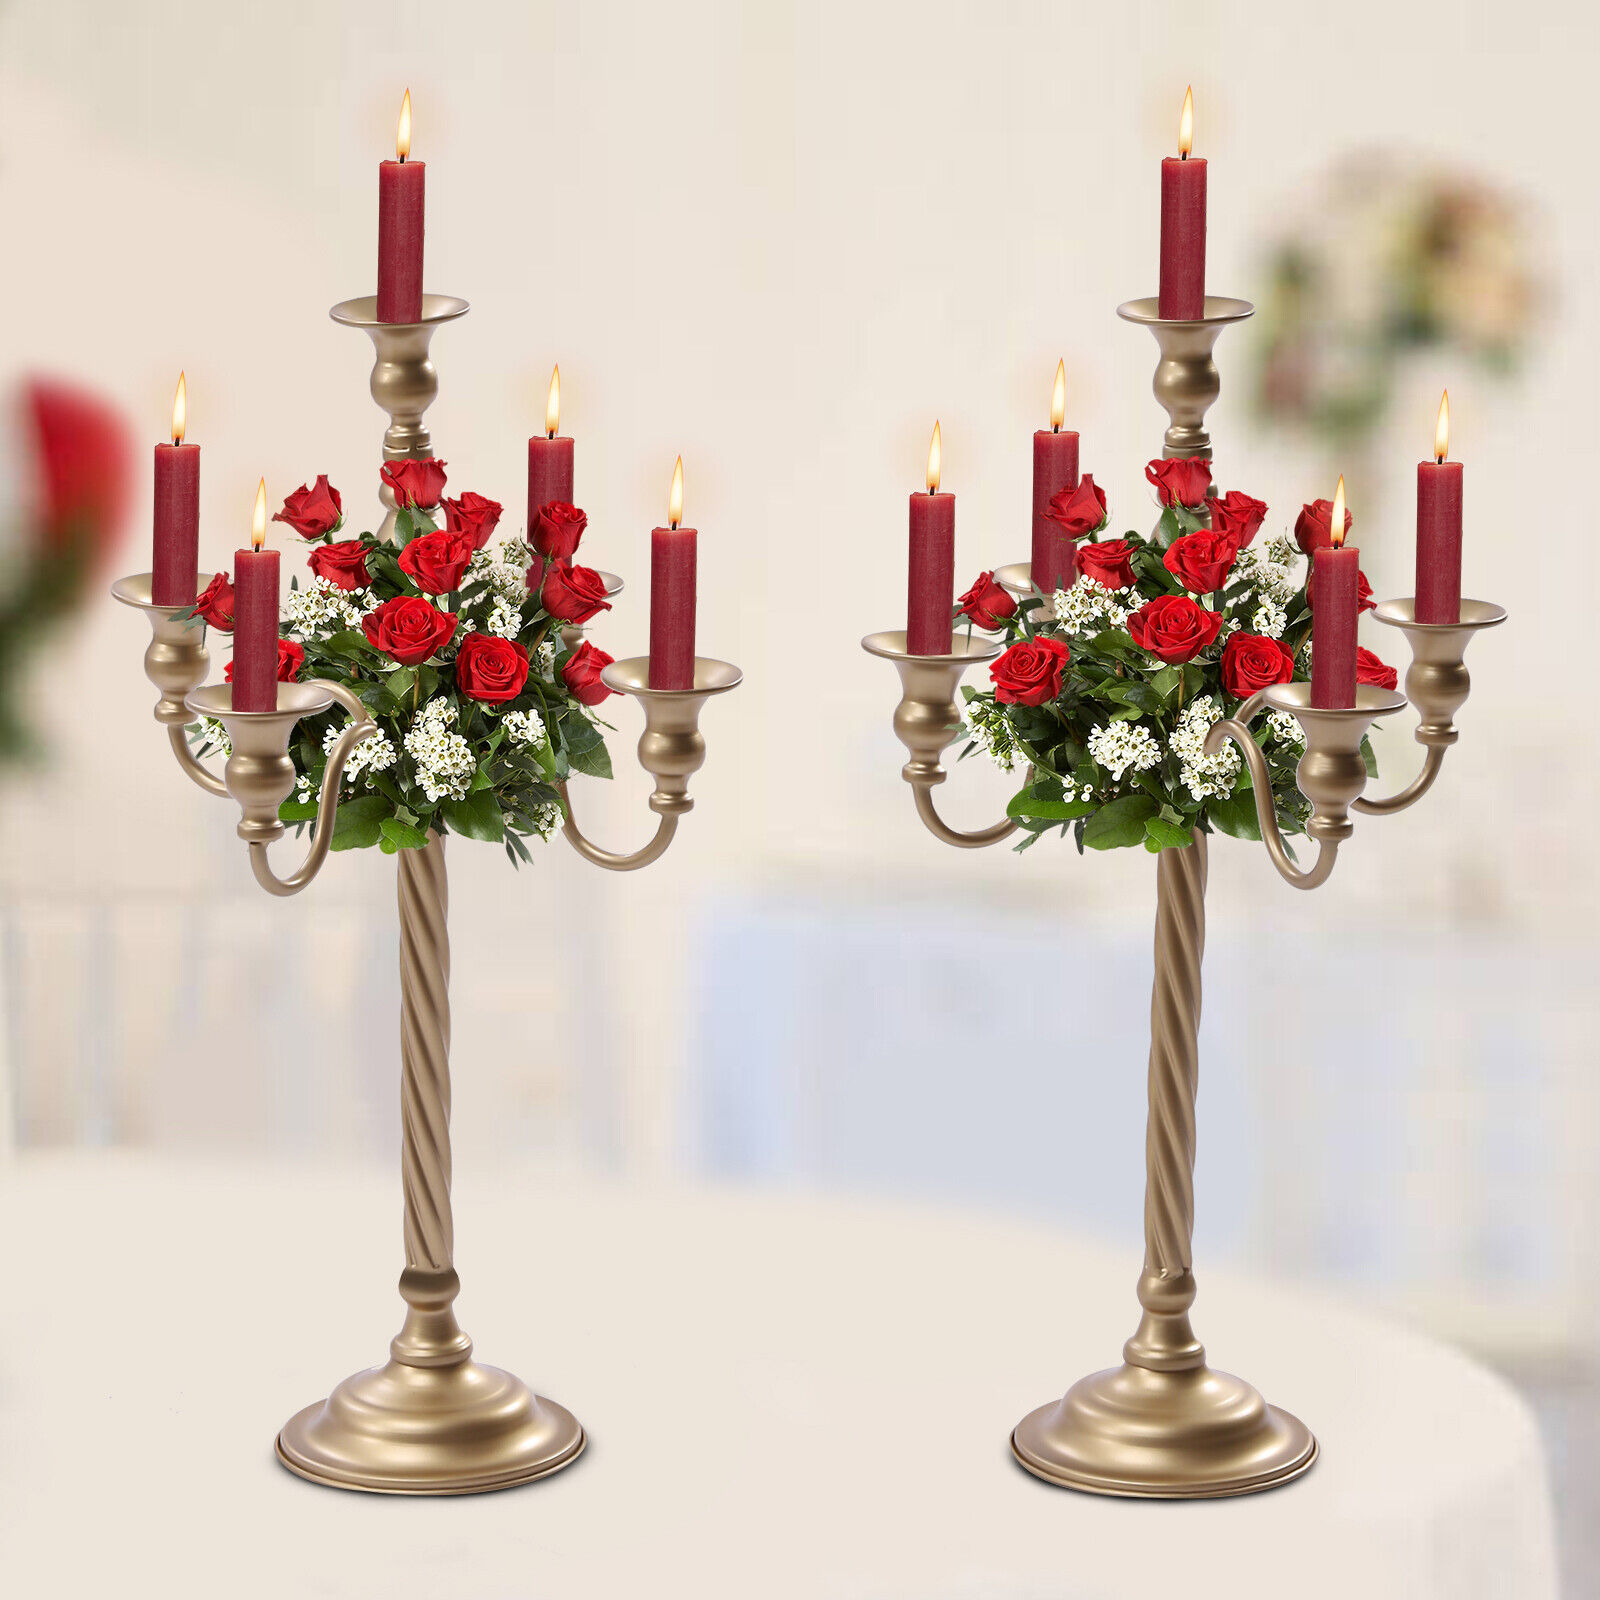 2Pcs Metal Candelabra Candle Holder Floral Stand Wedding Party Table Centerpiece